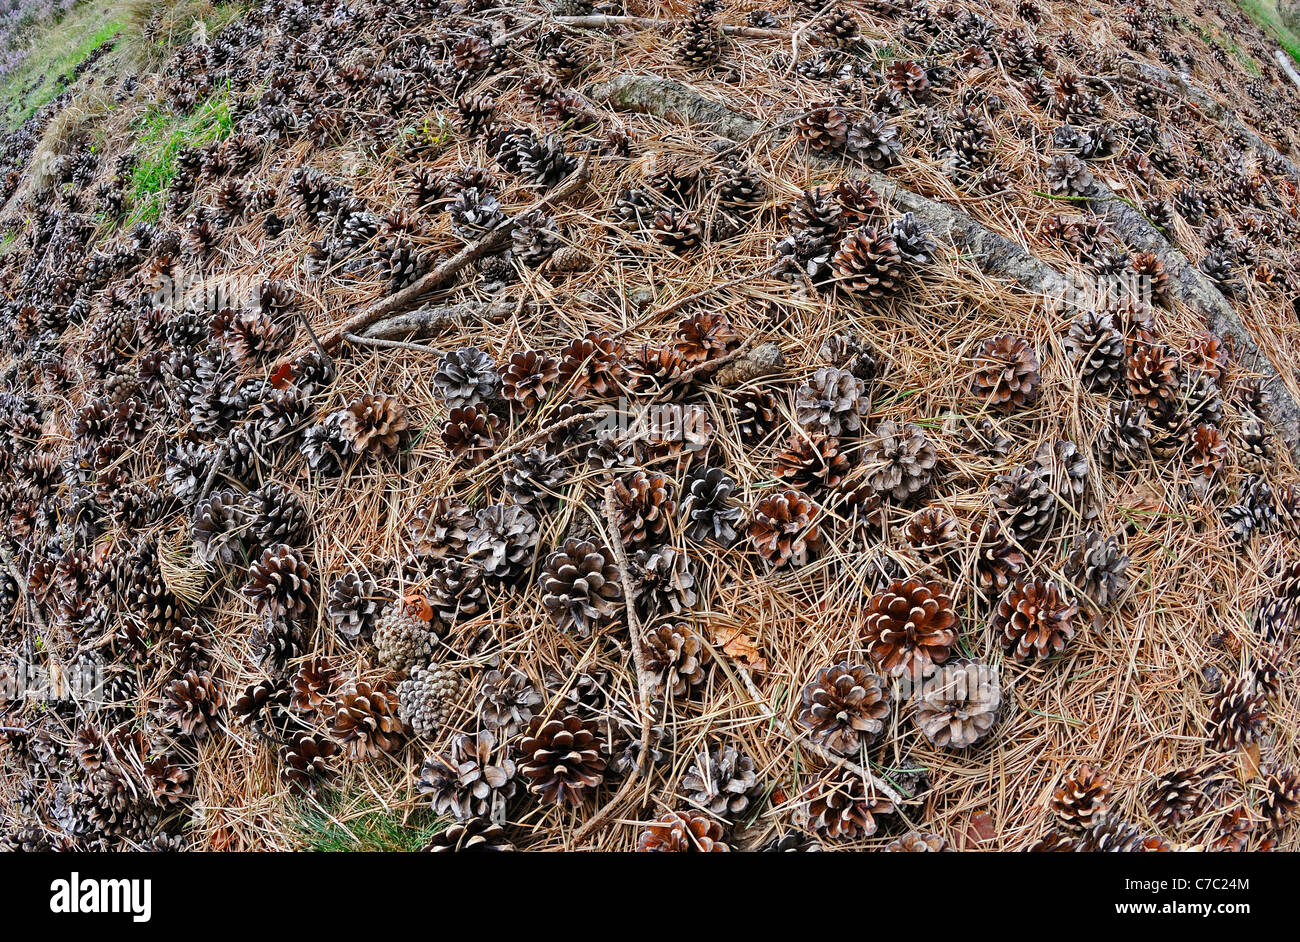 Pine cones and needles laying on the forest floor. Stock Photo